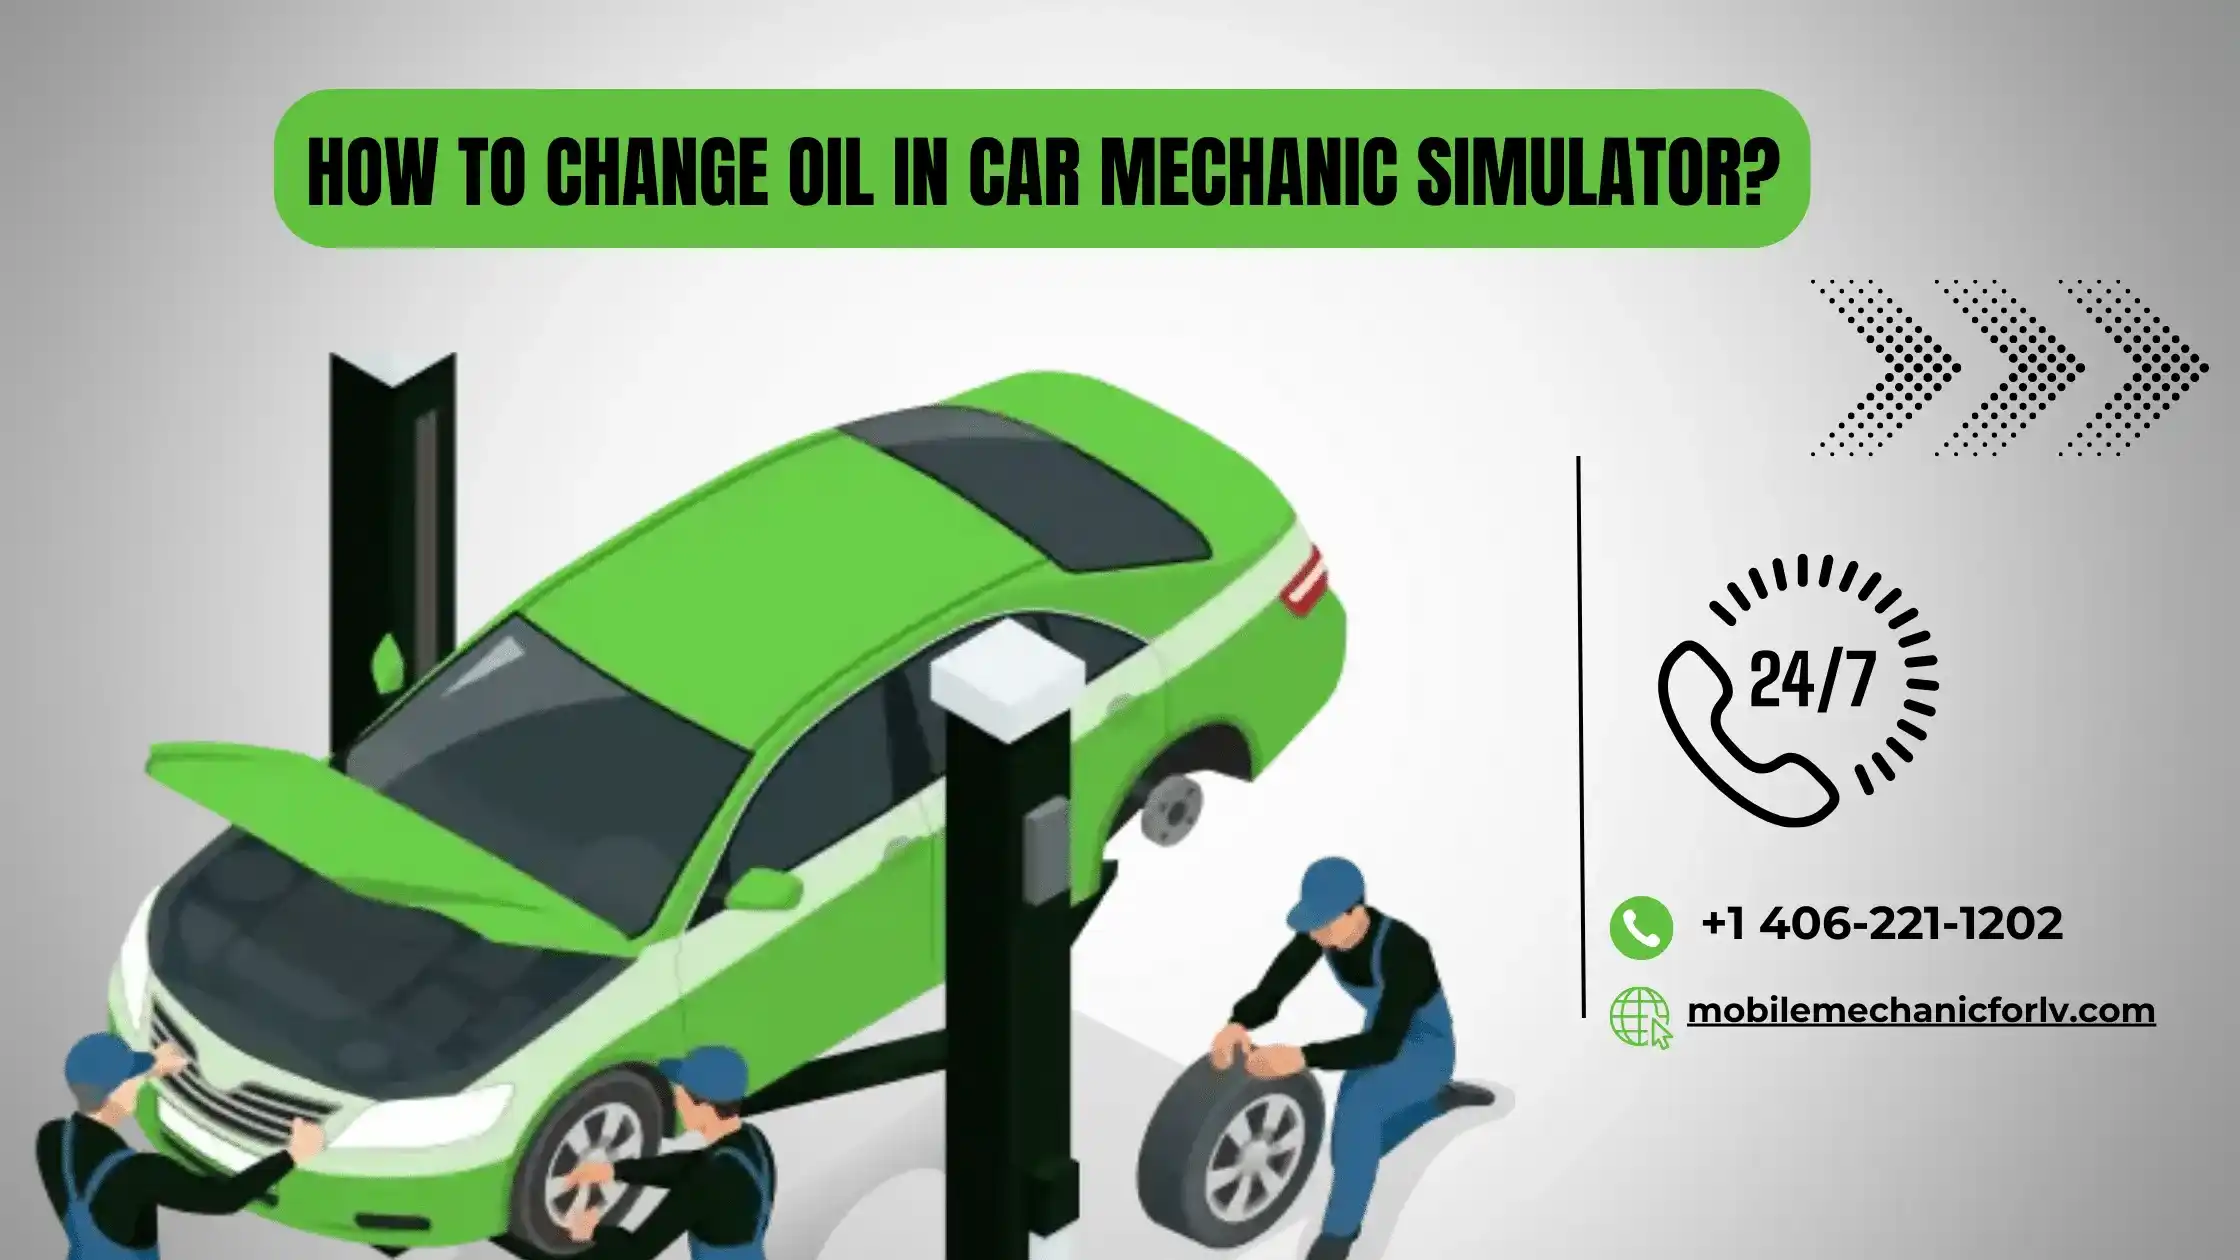 How To Change Oil In Car Mechanic Simulator